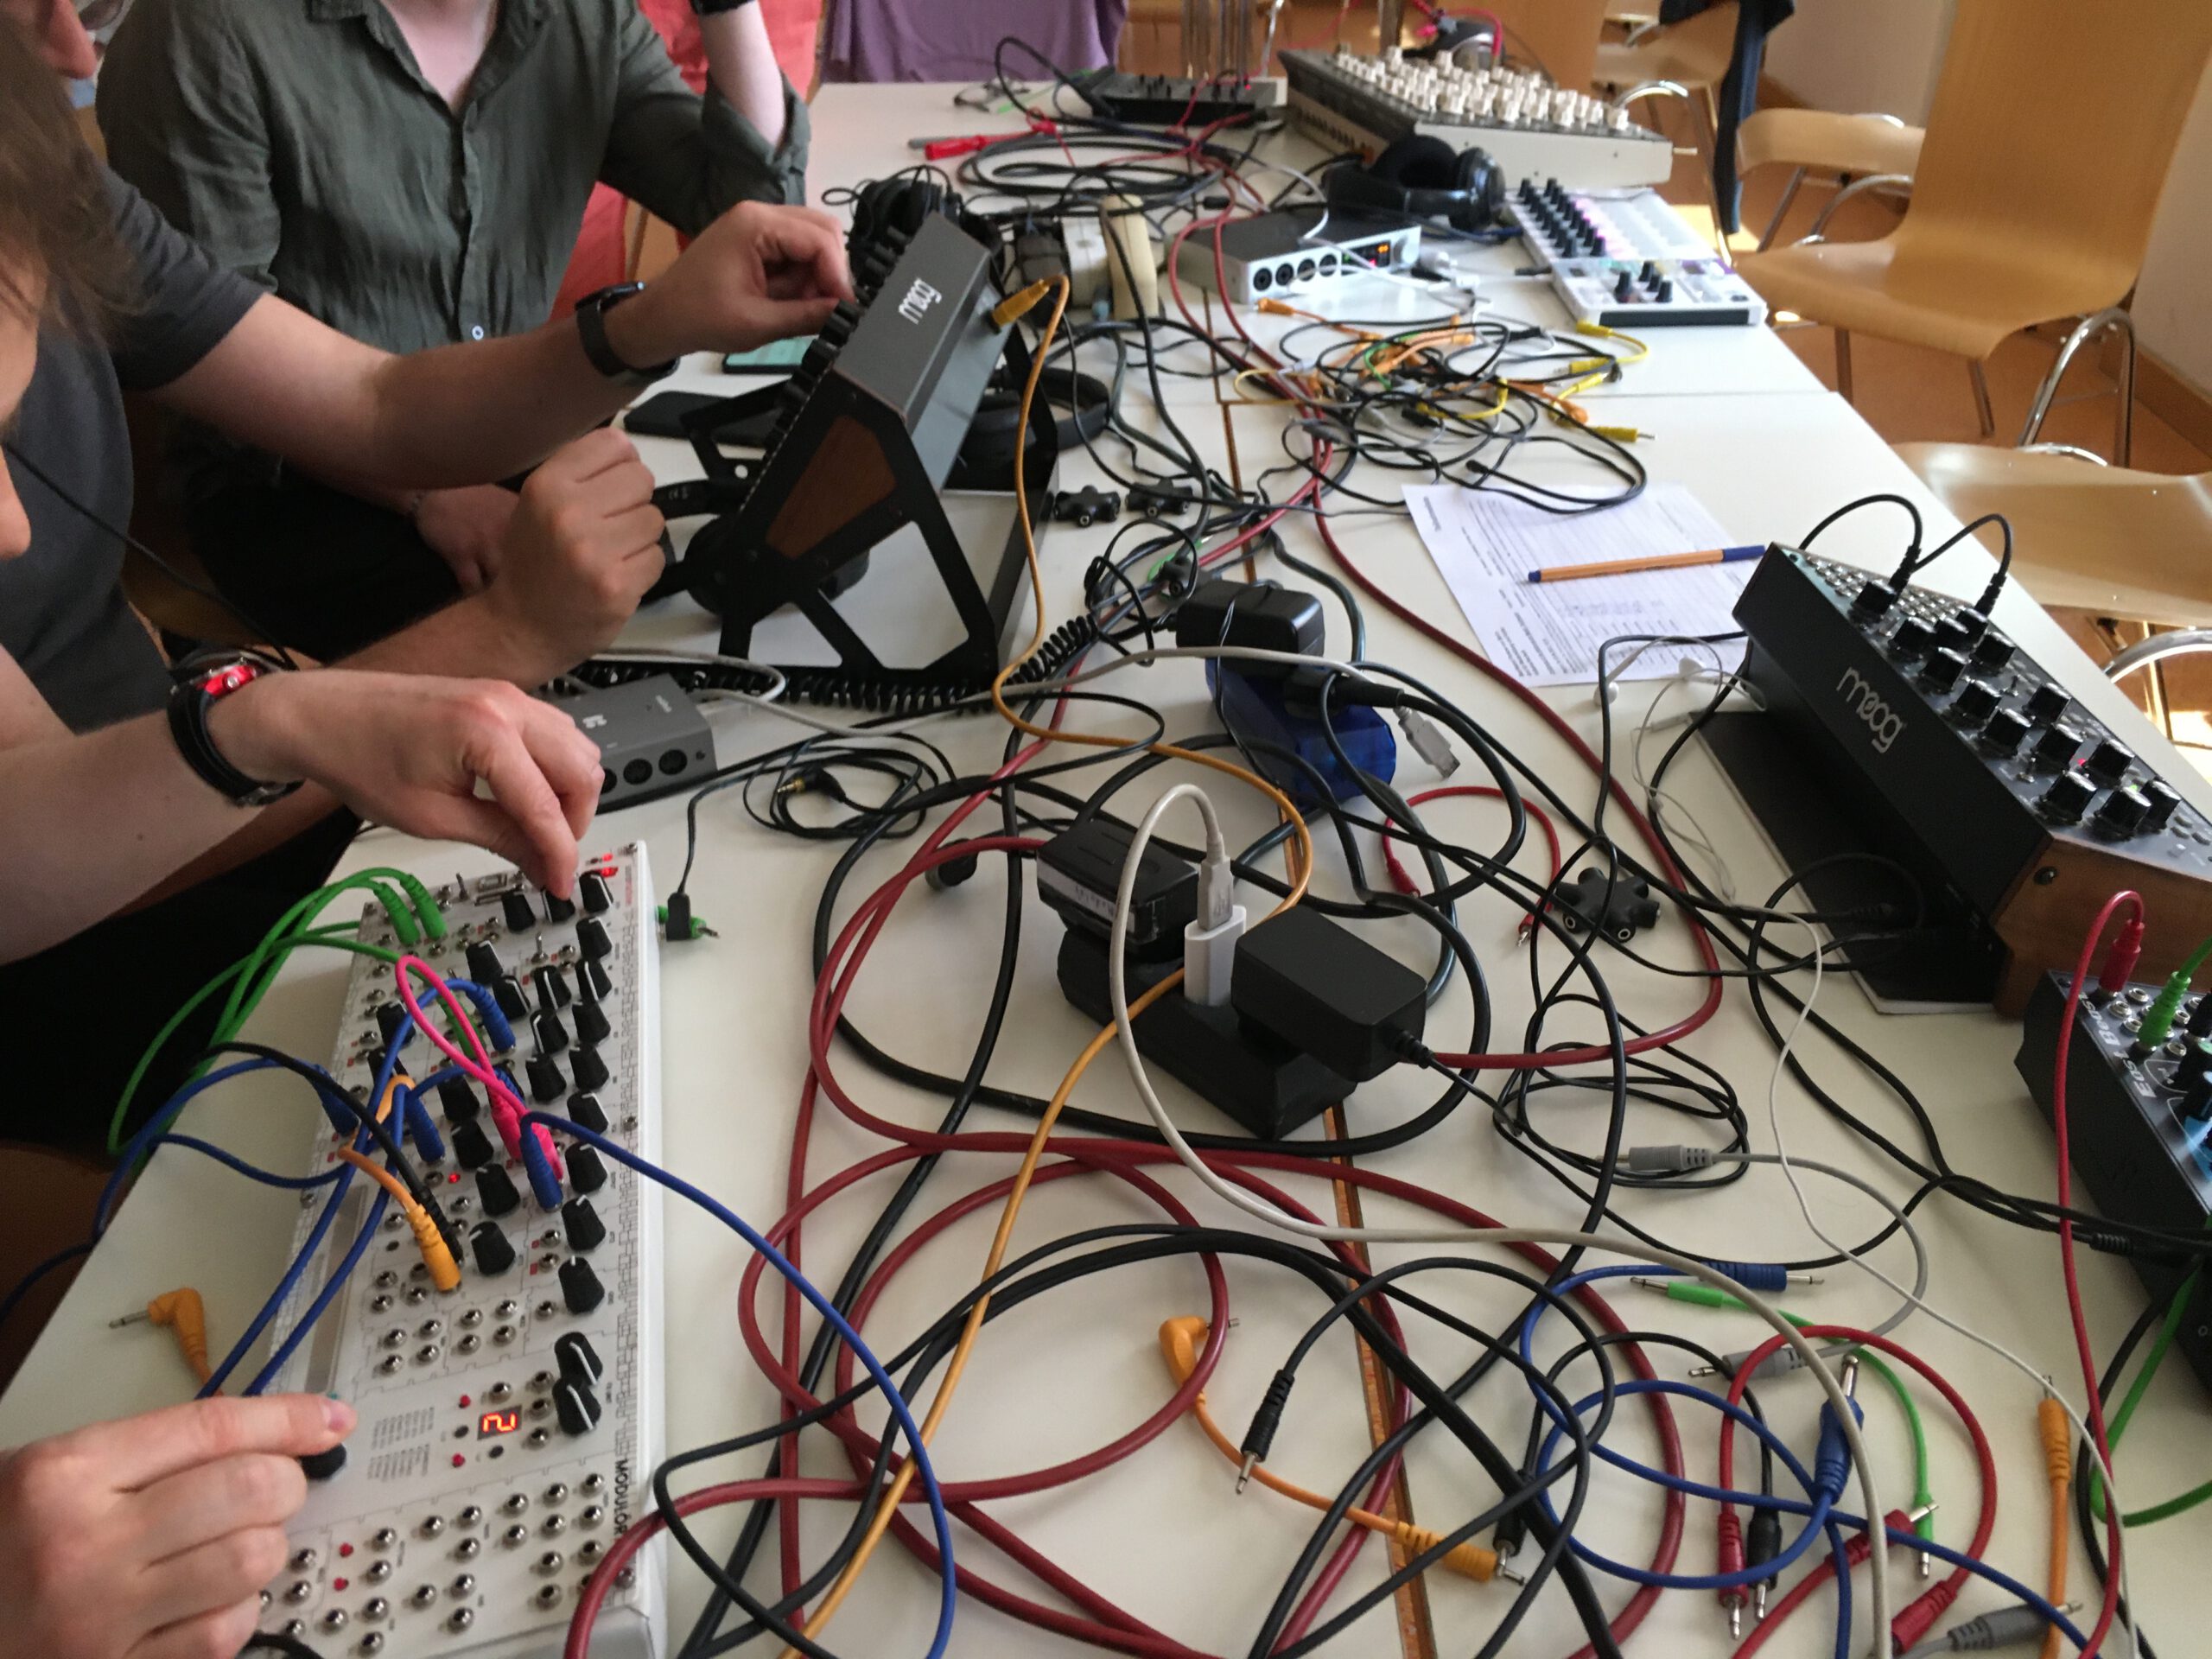 Synthesizer-Kurs an der VHS Pankow